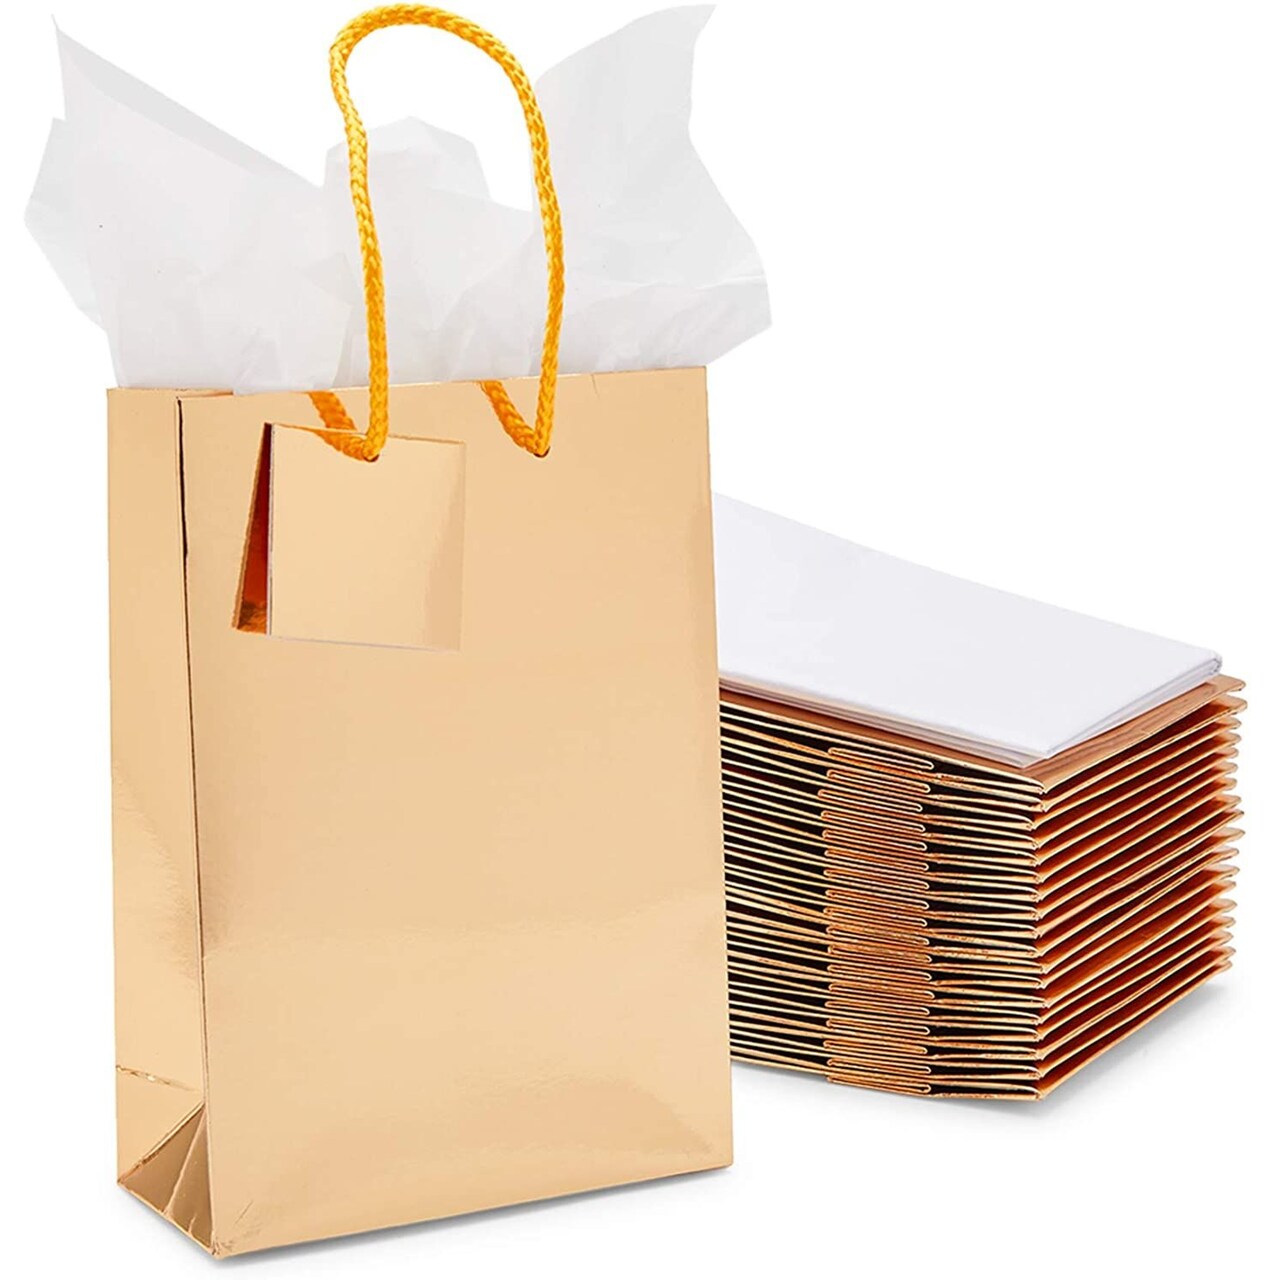 Gold Gift Bags with Tissue Paper (5.45 x 7.8 x 2.45 in, 20 Pack)